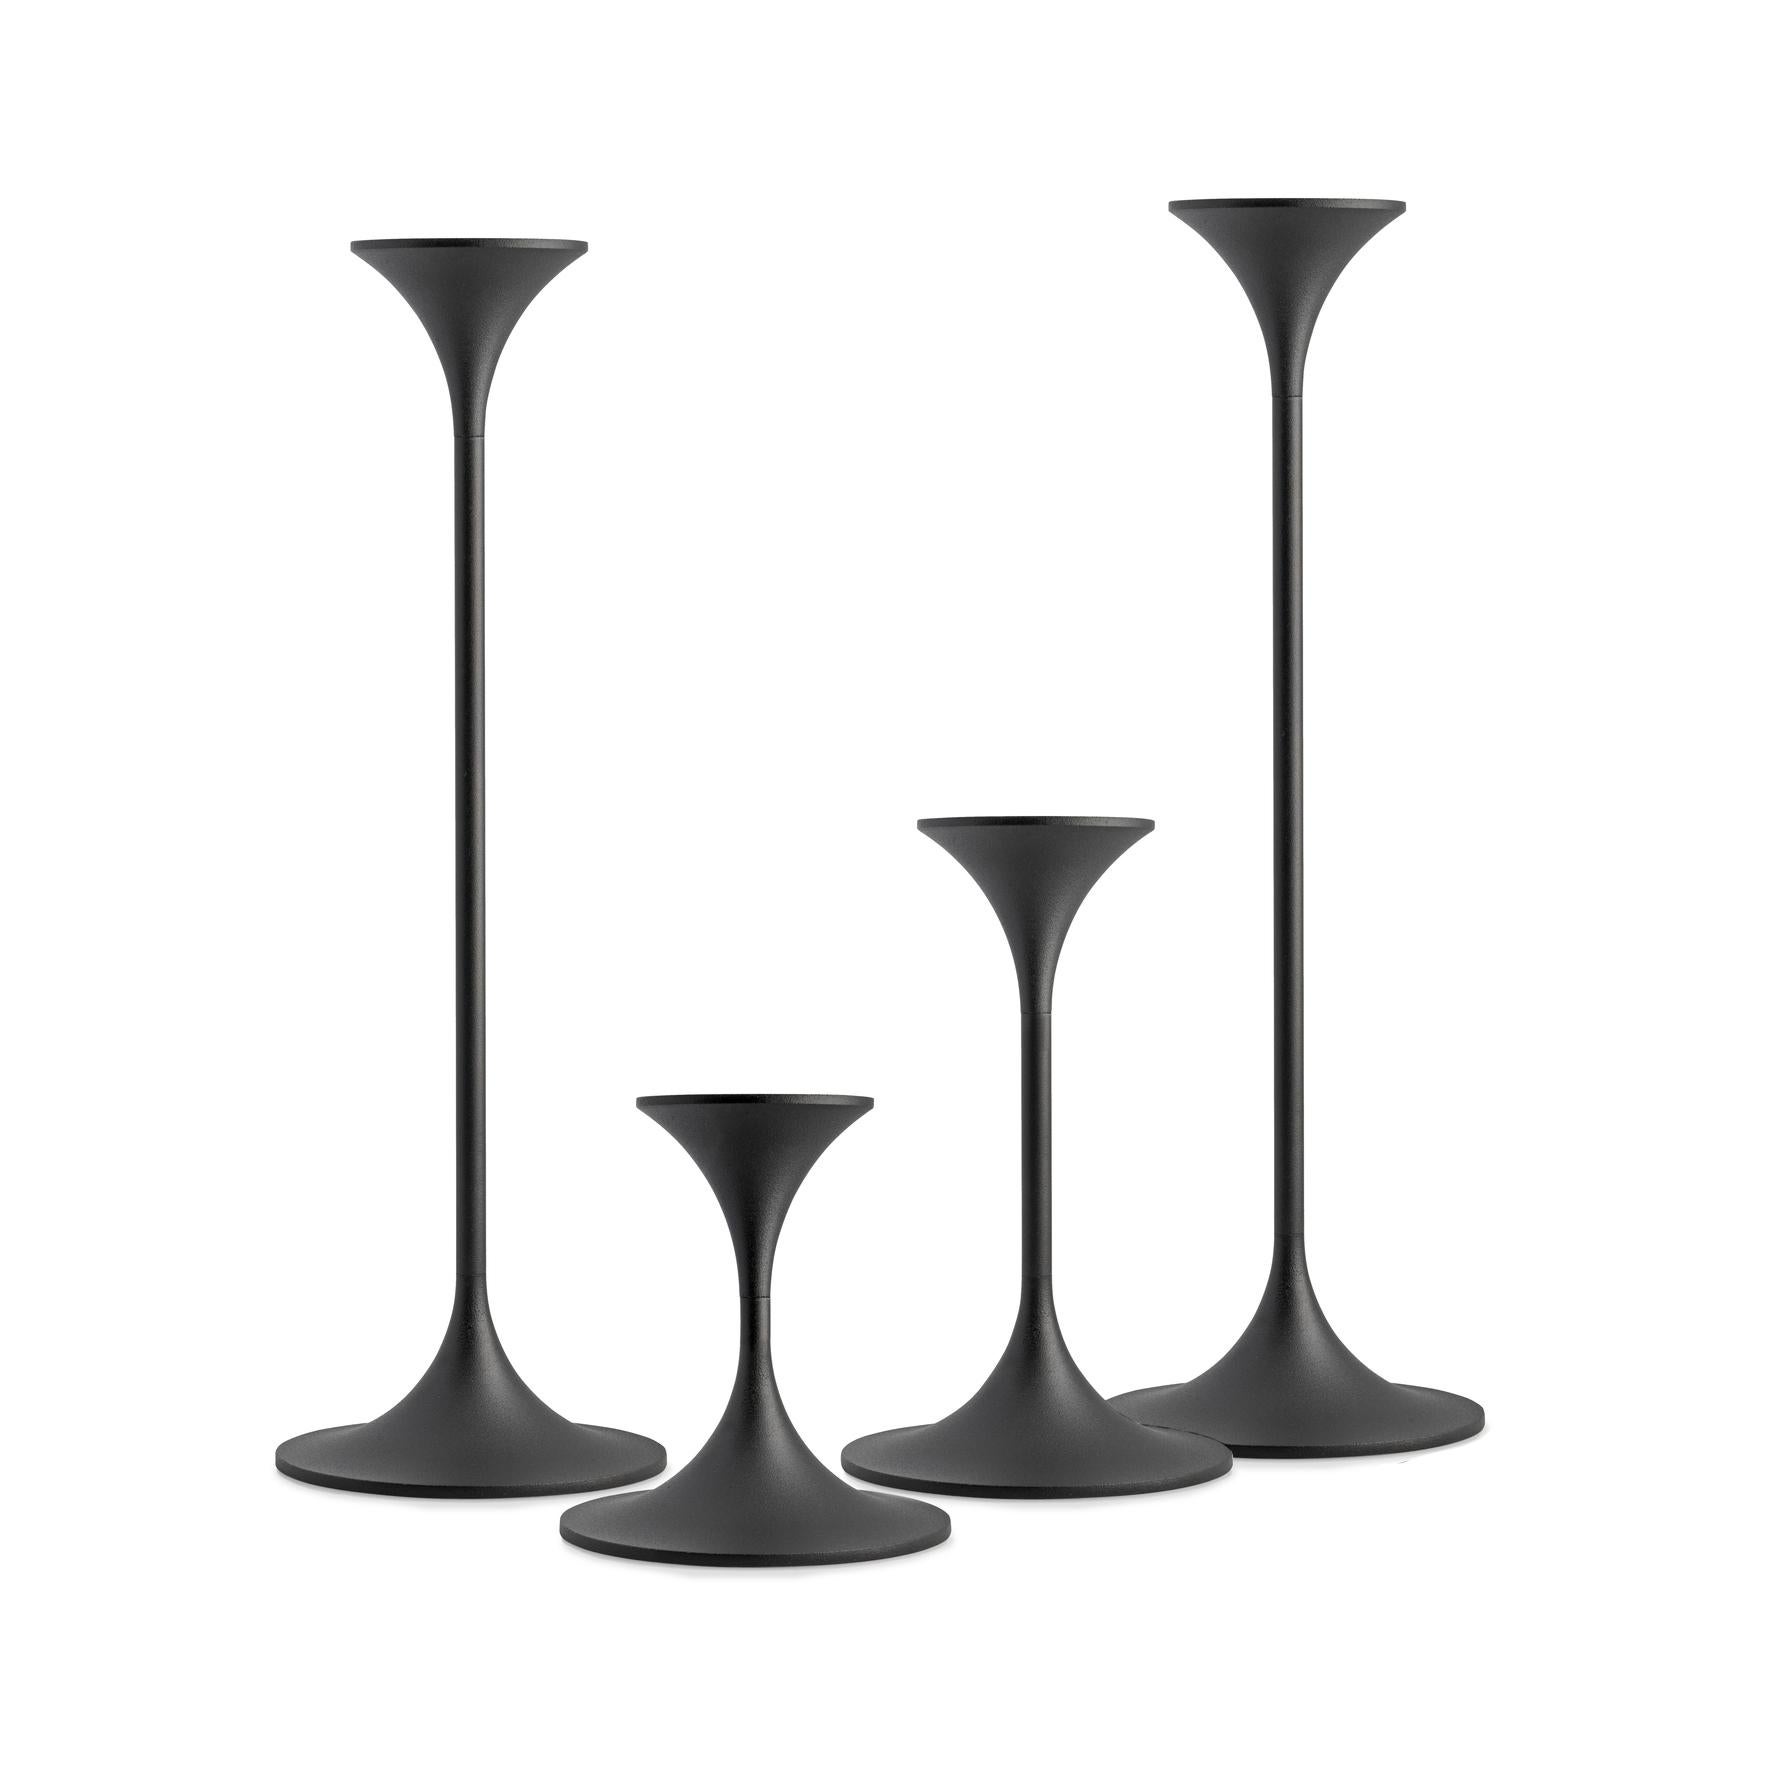 Contemporary Set of Four Max Brüel 'Jazz' Candleholders, Steel with Black Powder Coating